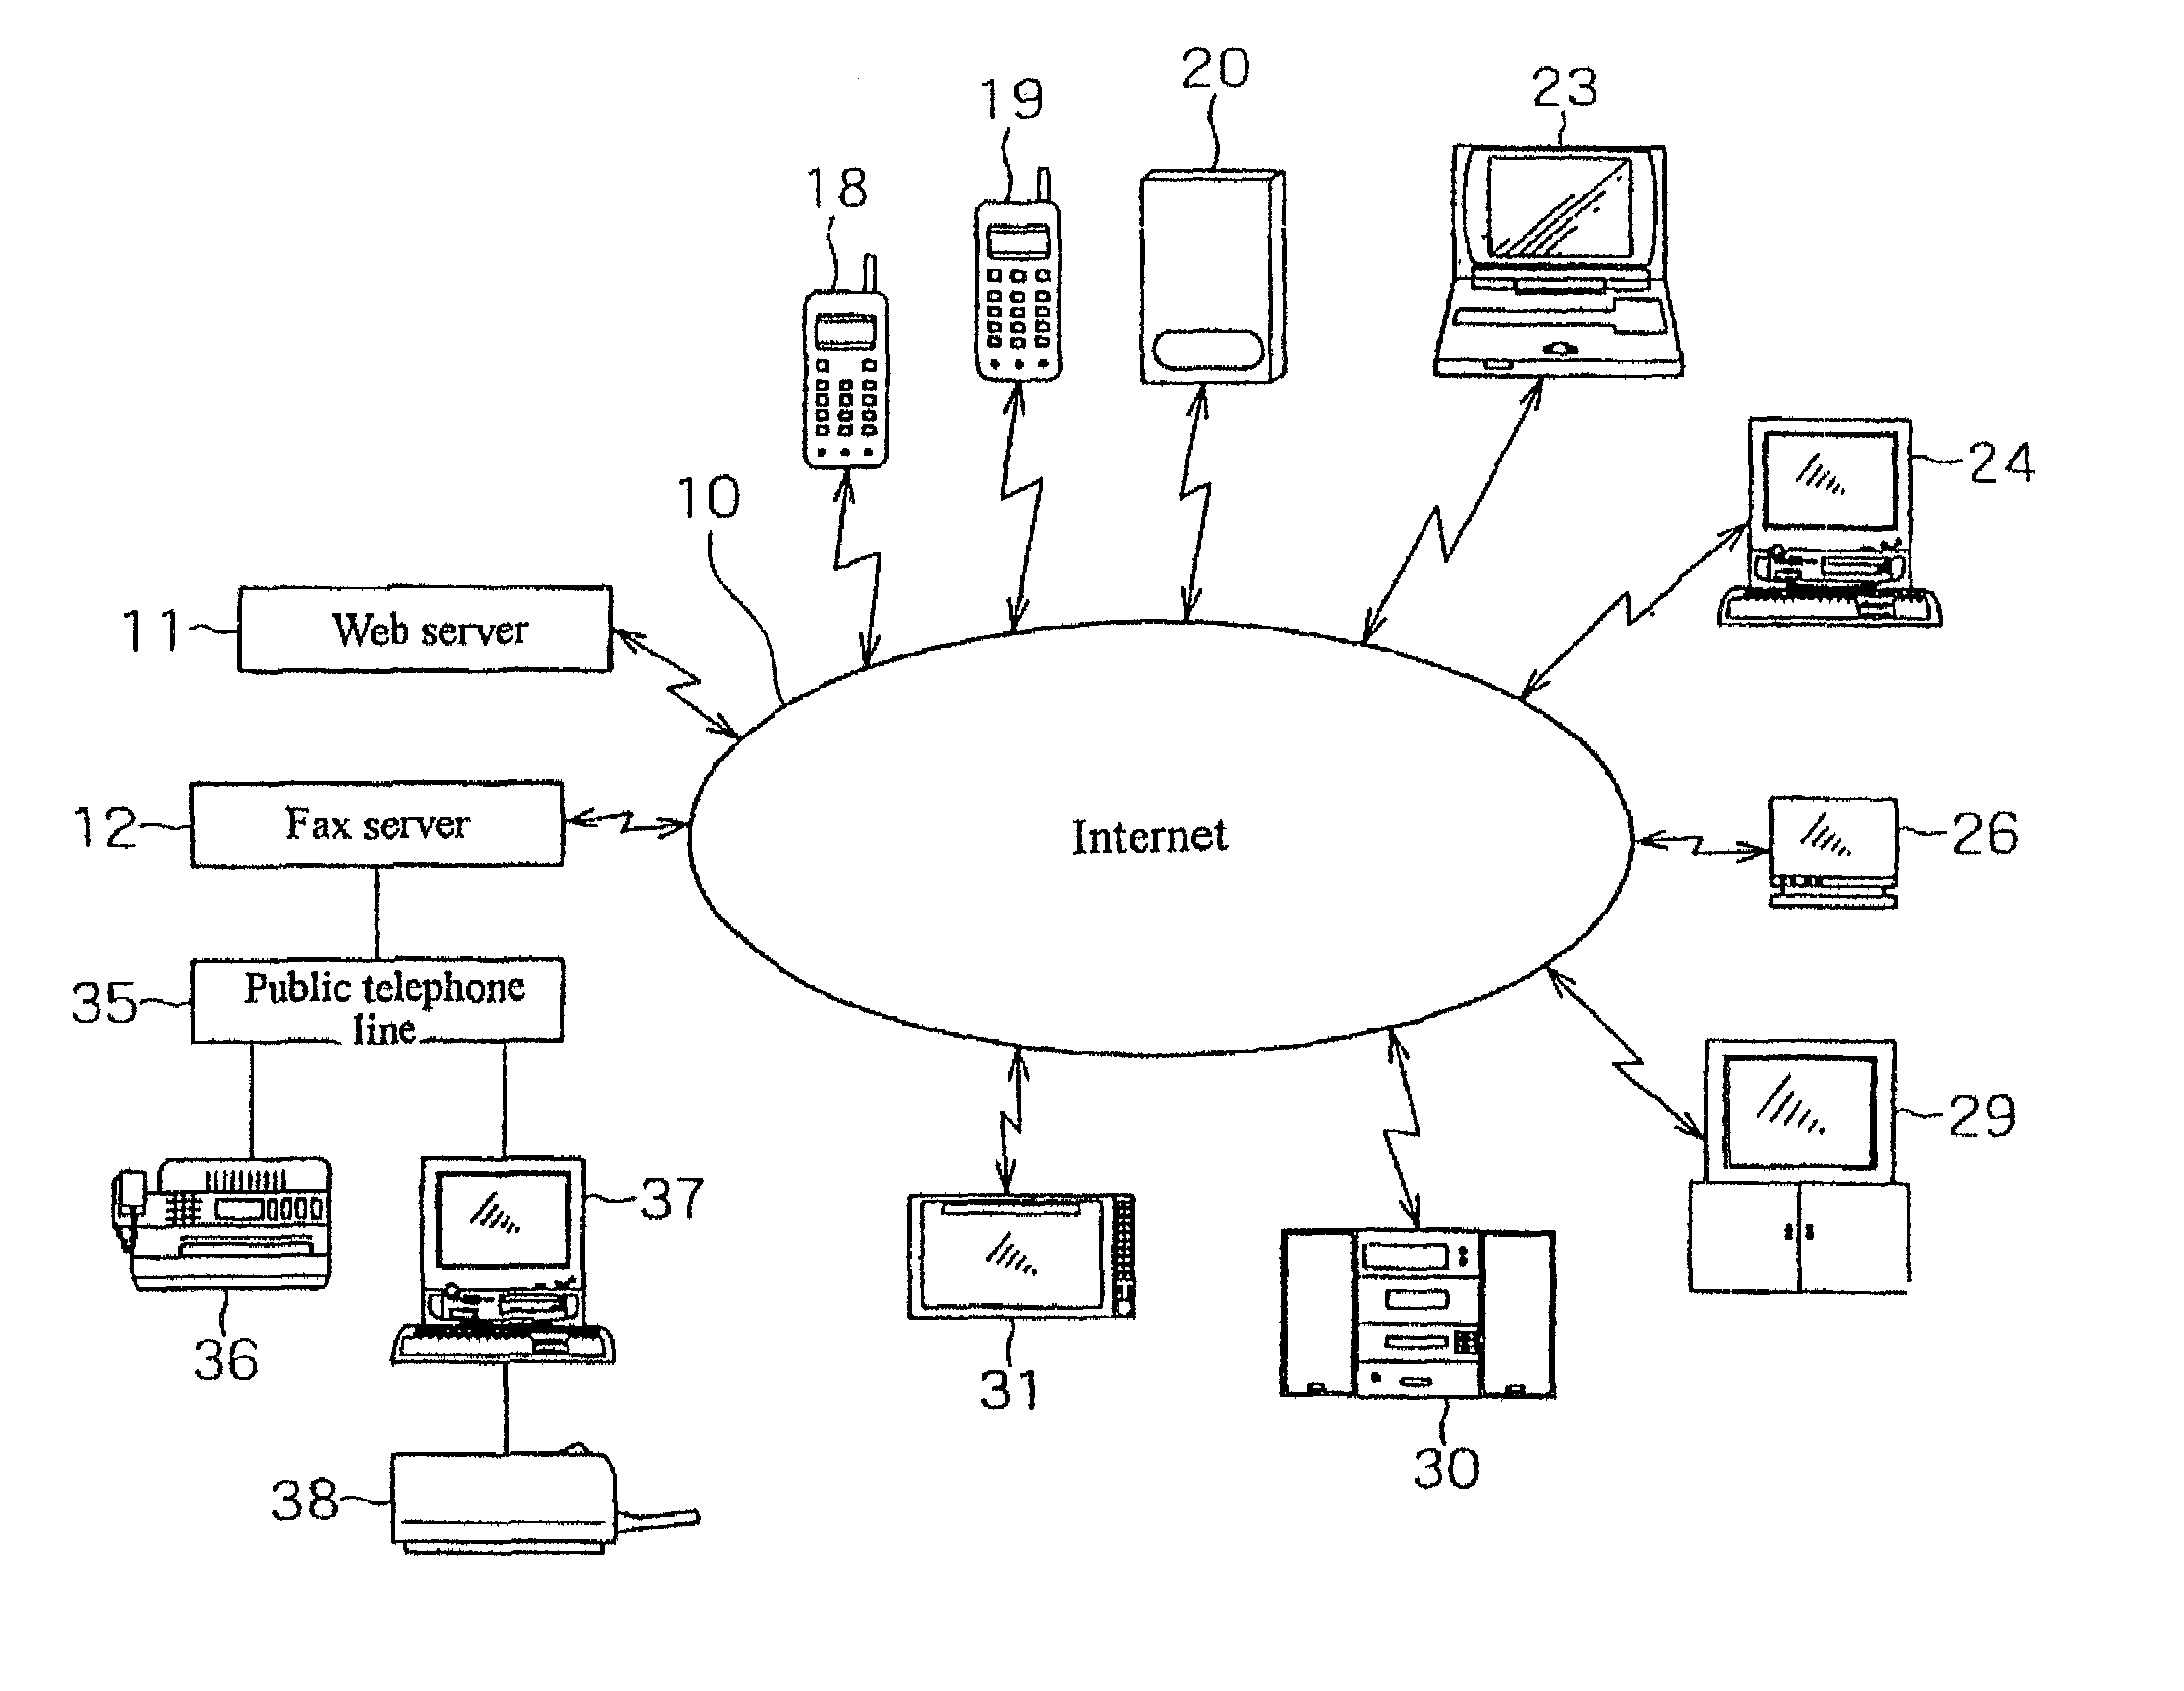 Method for hard-copying web pages, method for printing display screens, system for hard-copying web pages, and internet connection device equipped with current-position detection capabilities